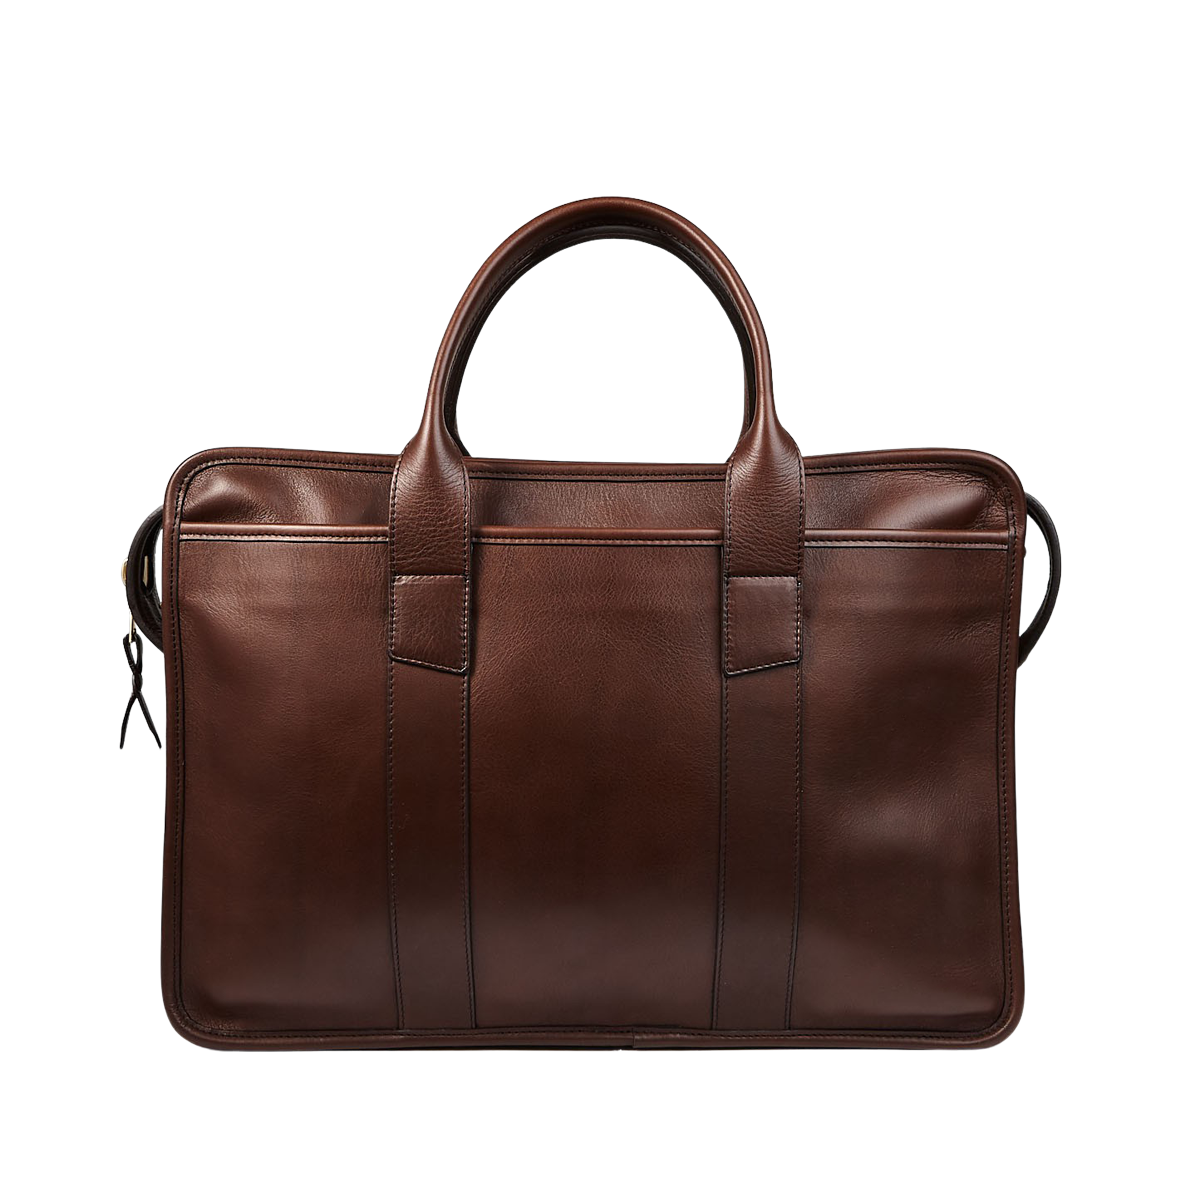 The Frank Clegg Chocolate Tumbled Bound Edge Leather Zip-Top Briefcase.